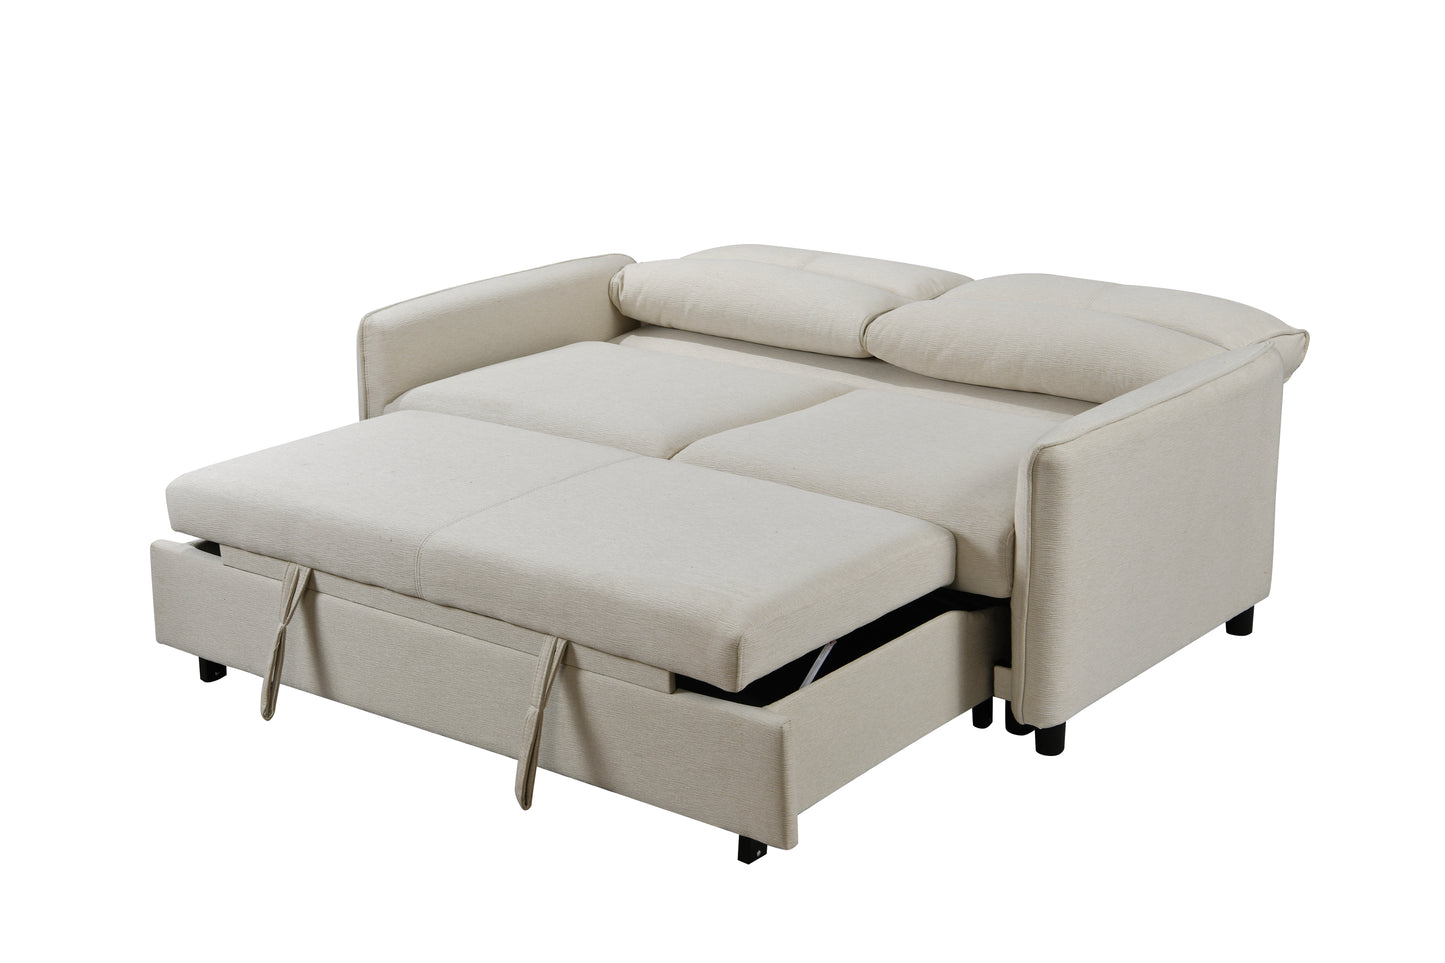 3 in 1 Convertible Sleeper Sofa Bed Modern Fabric Loveseat Futon Sofa Couch w/Pullout Bed Beige